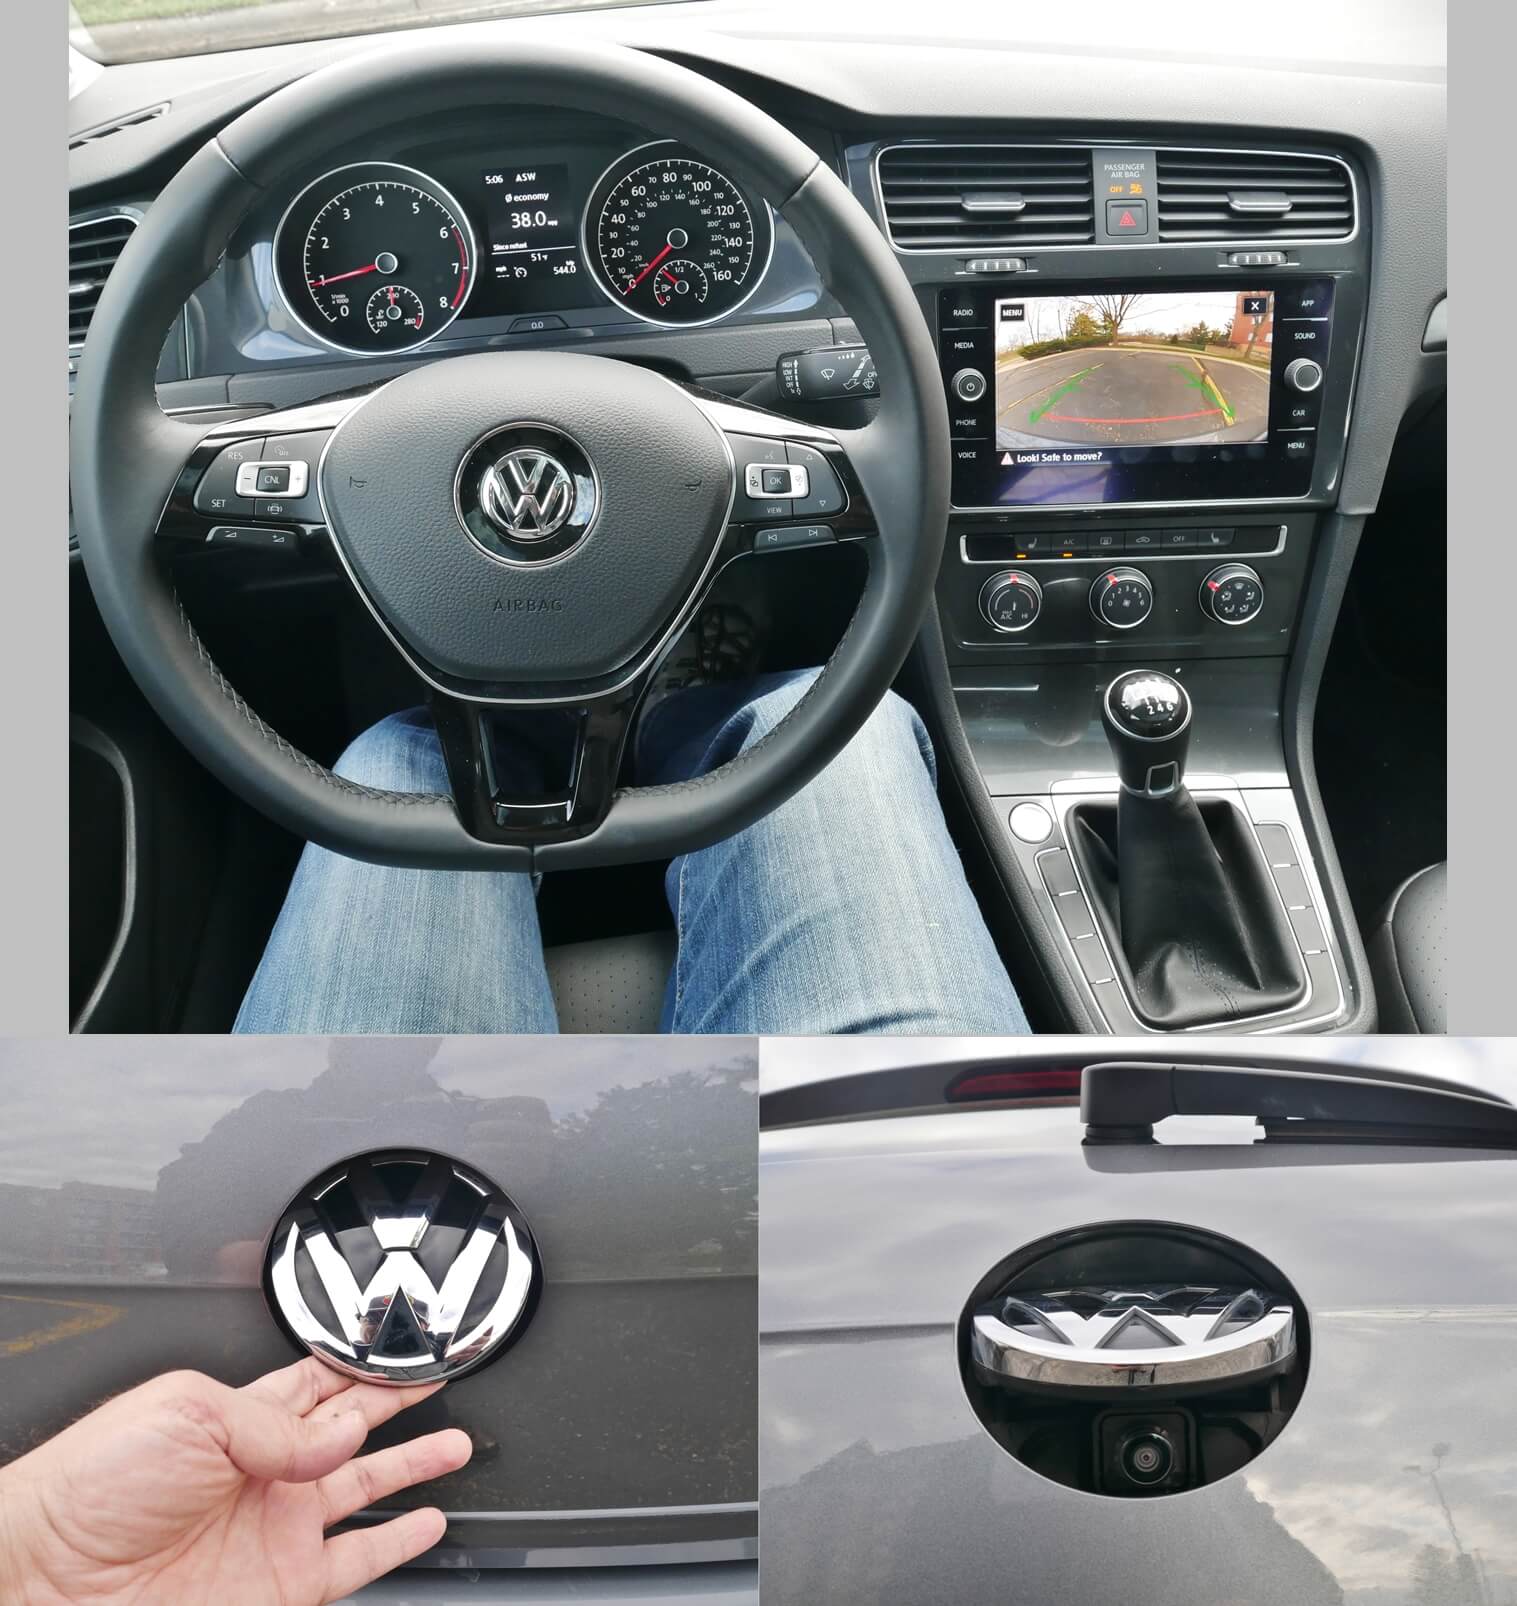 2019 Volkswagen Golf SE: liftgate VW emblem serves dual function as liftgate release and retracting shielded rear camera for park guidance display